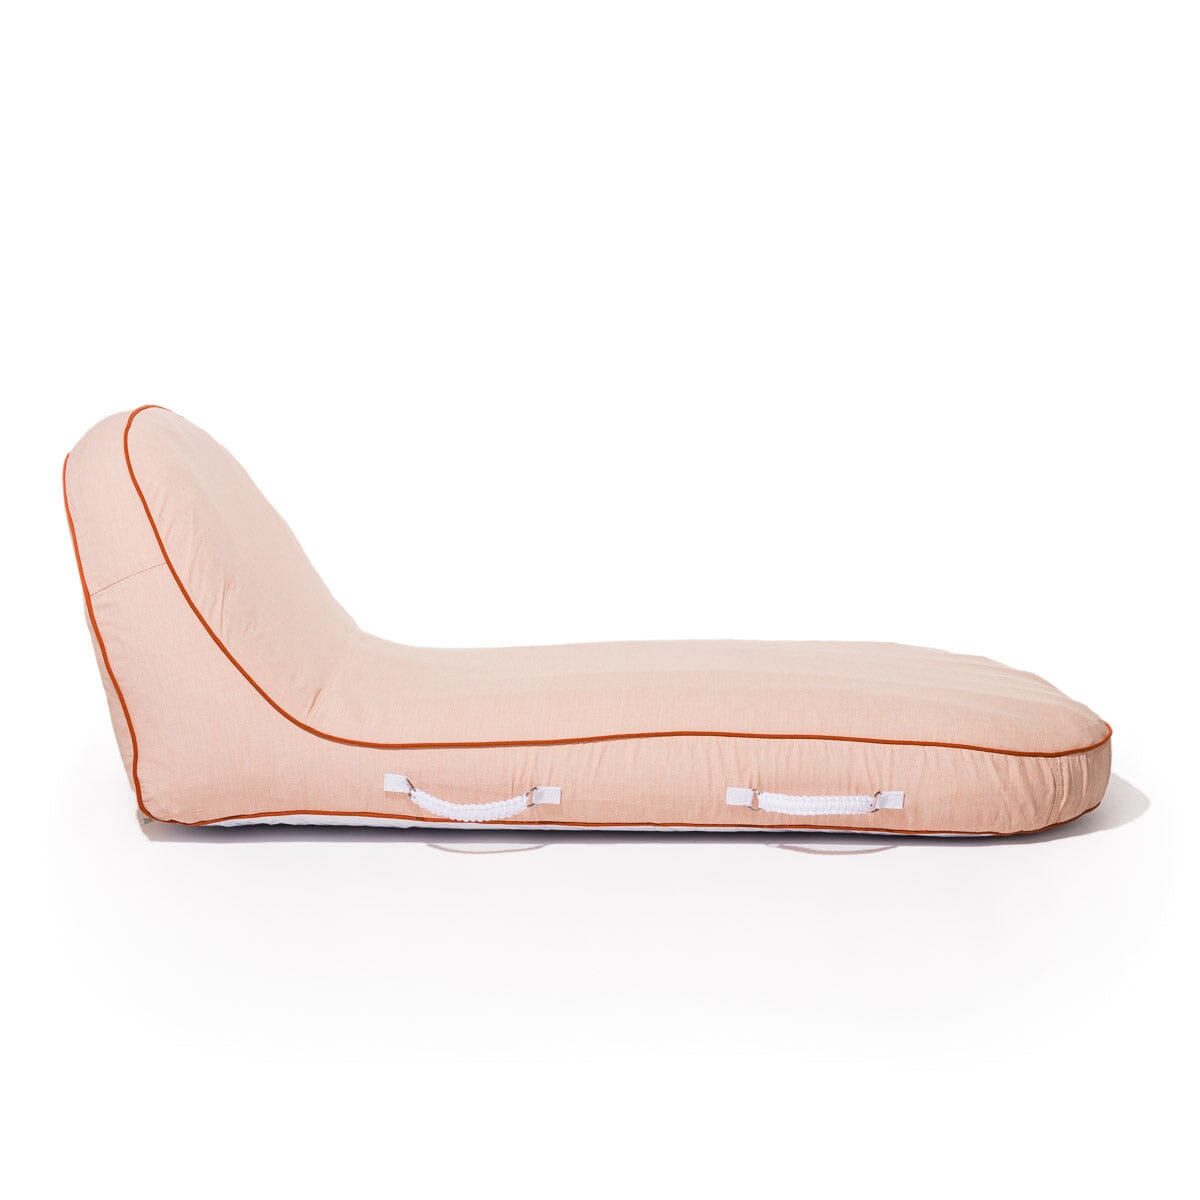 The Pool Lounger - Rivie Pink Pool Lounger Business & Pleasure Co. 